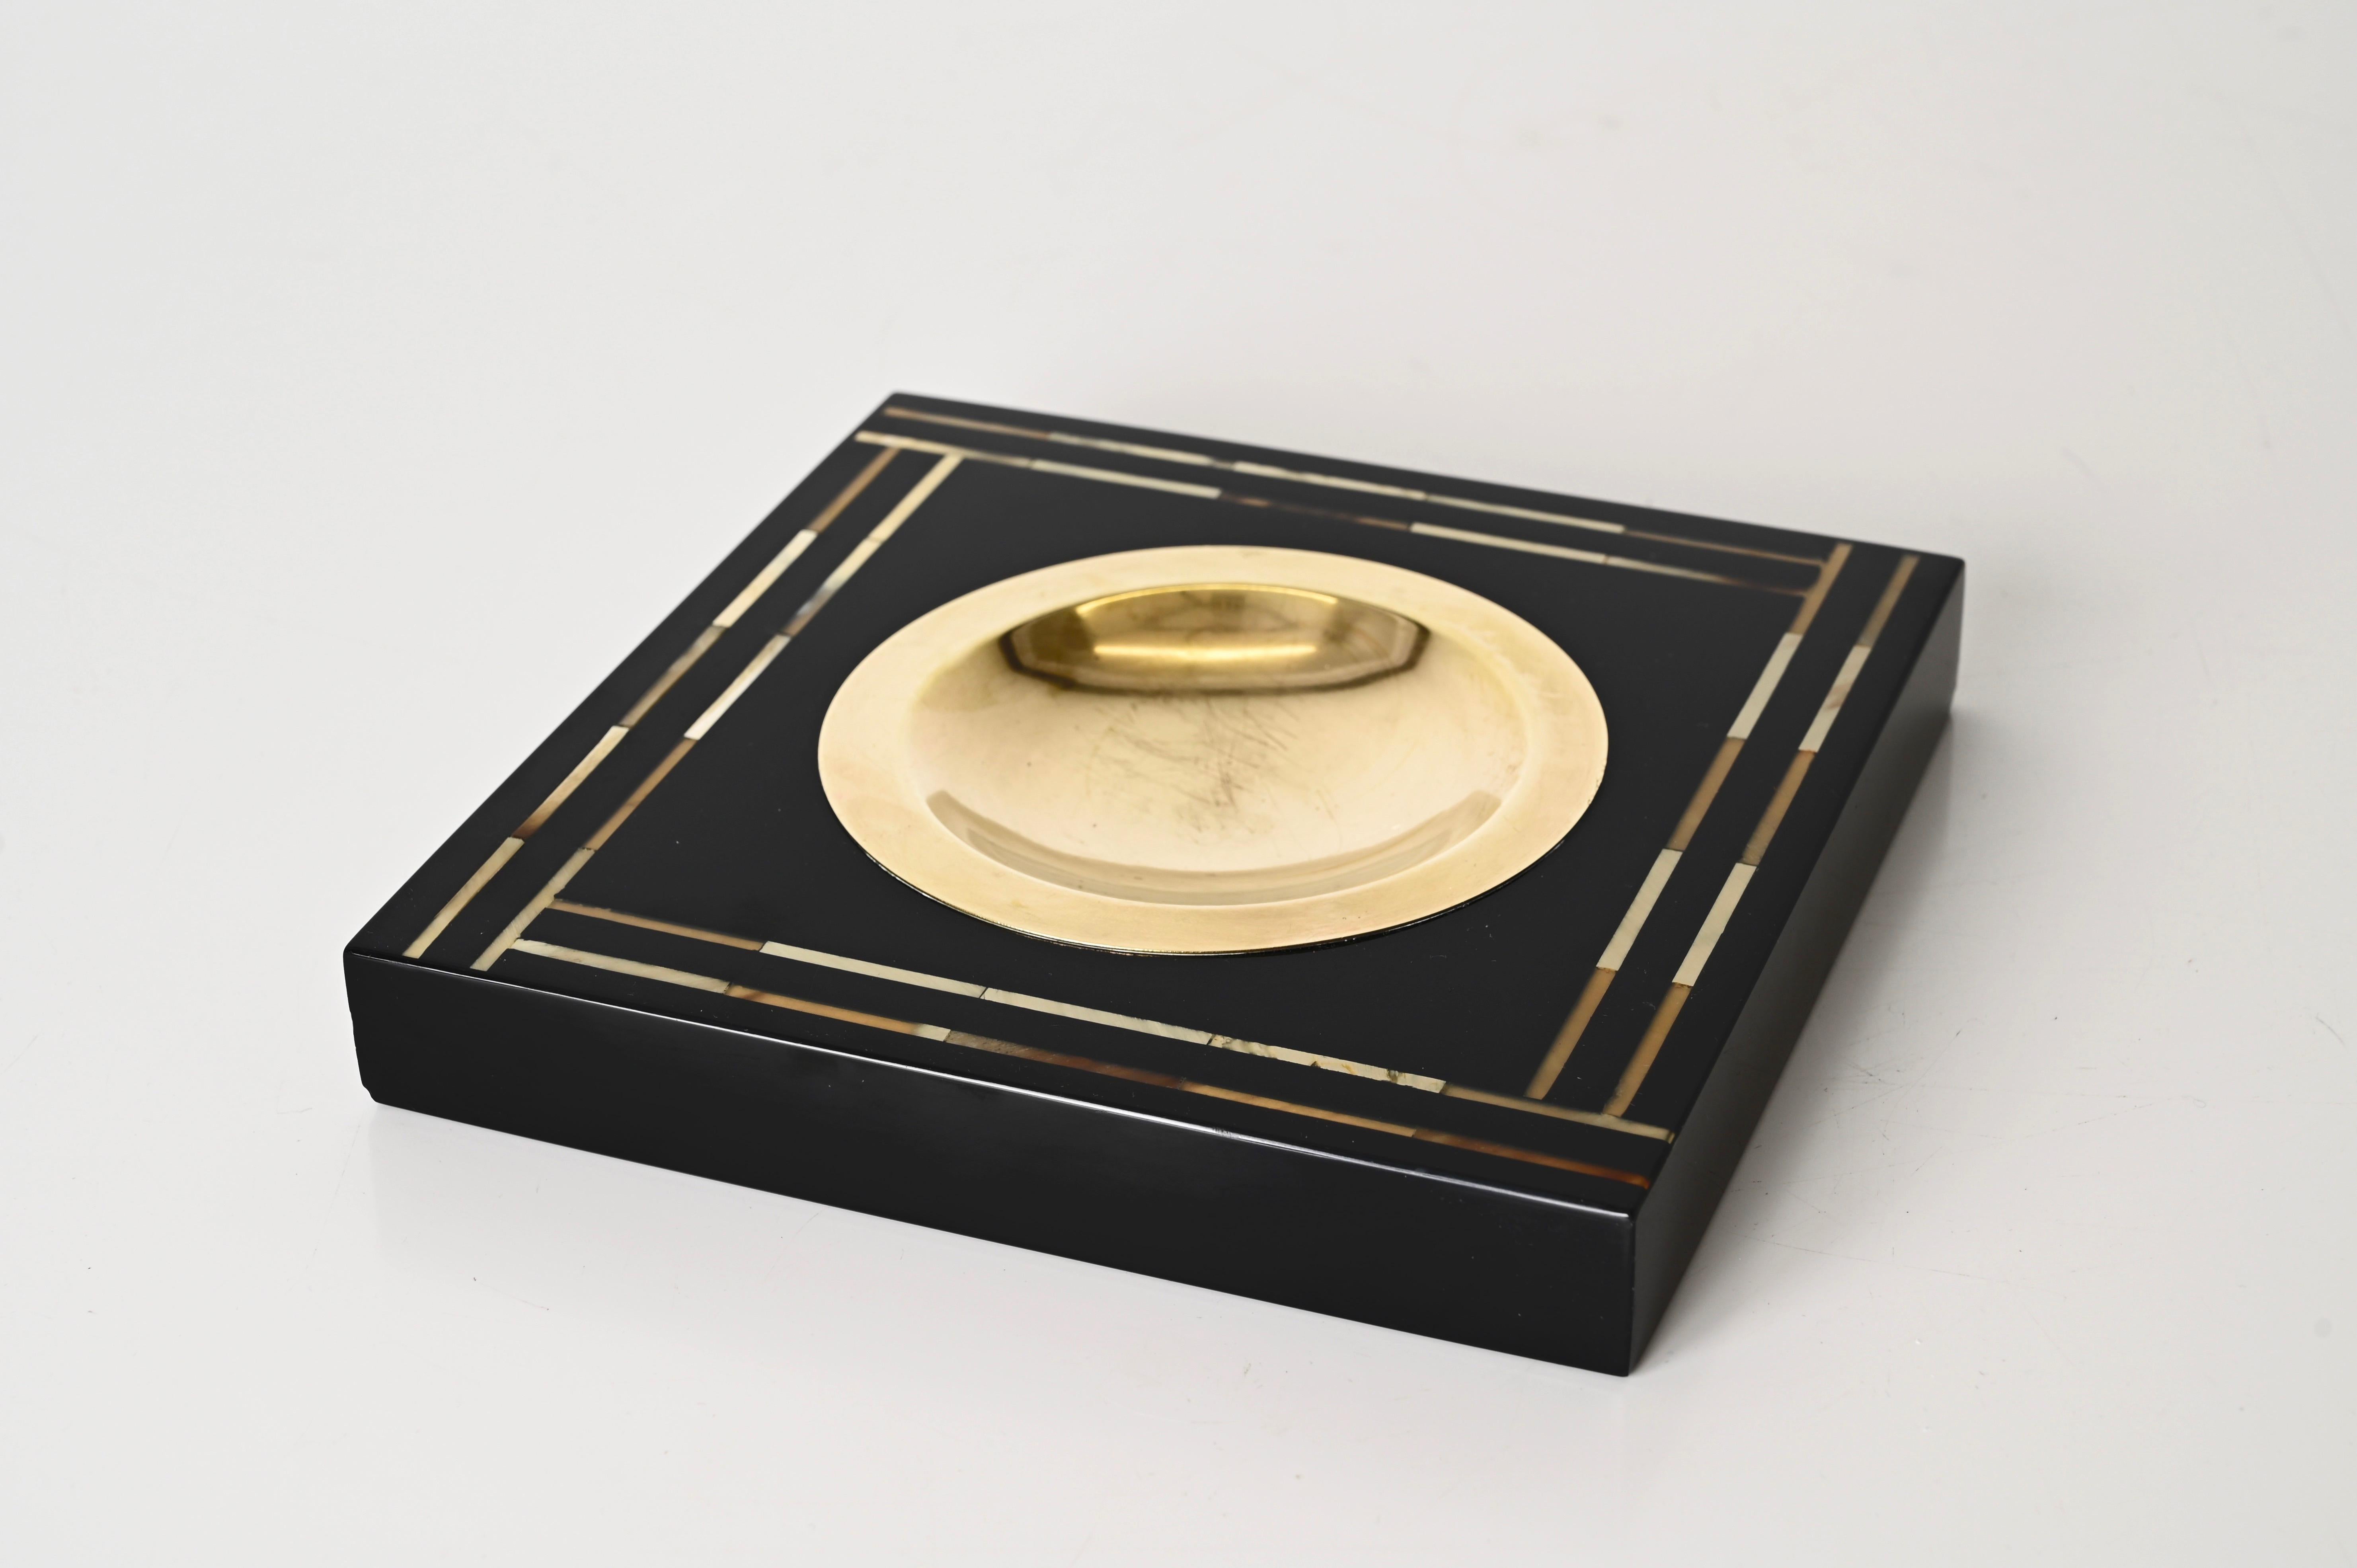 Splendid square pocket tray or ashtray made in black lacquered wood, shell and brass. This incredibly elegant object is attributed to Tommaso Barbi and was made in Italy during the 1970s clearly in the style of a Dior production.

Splendid example